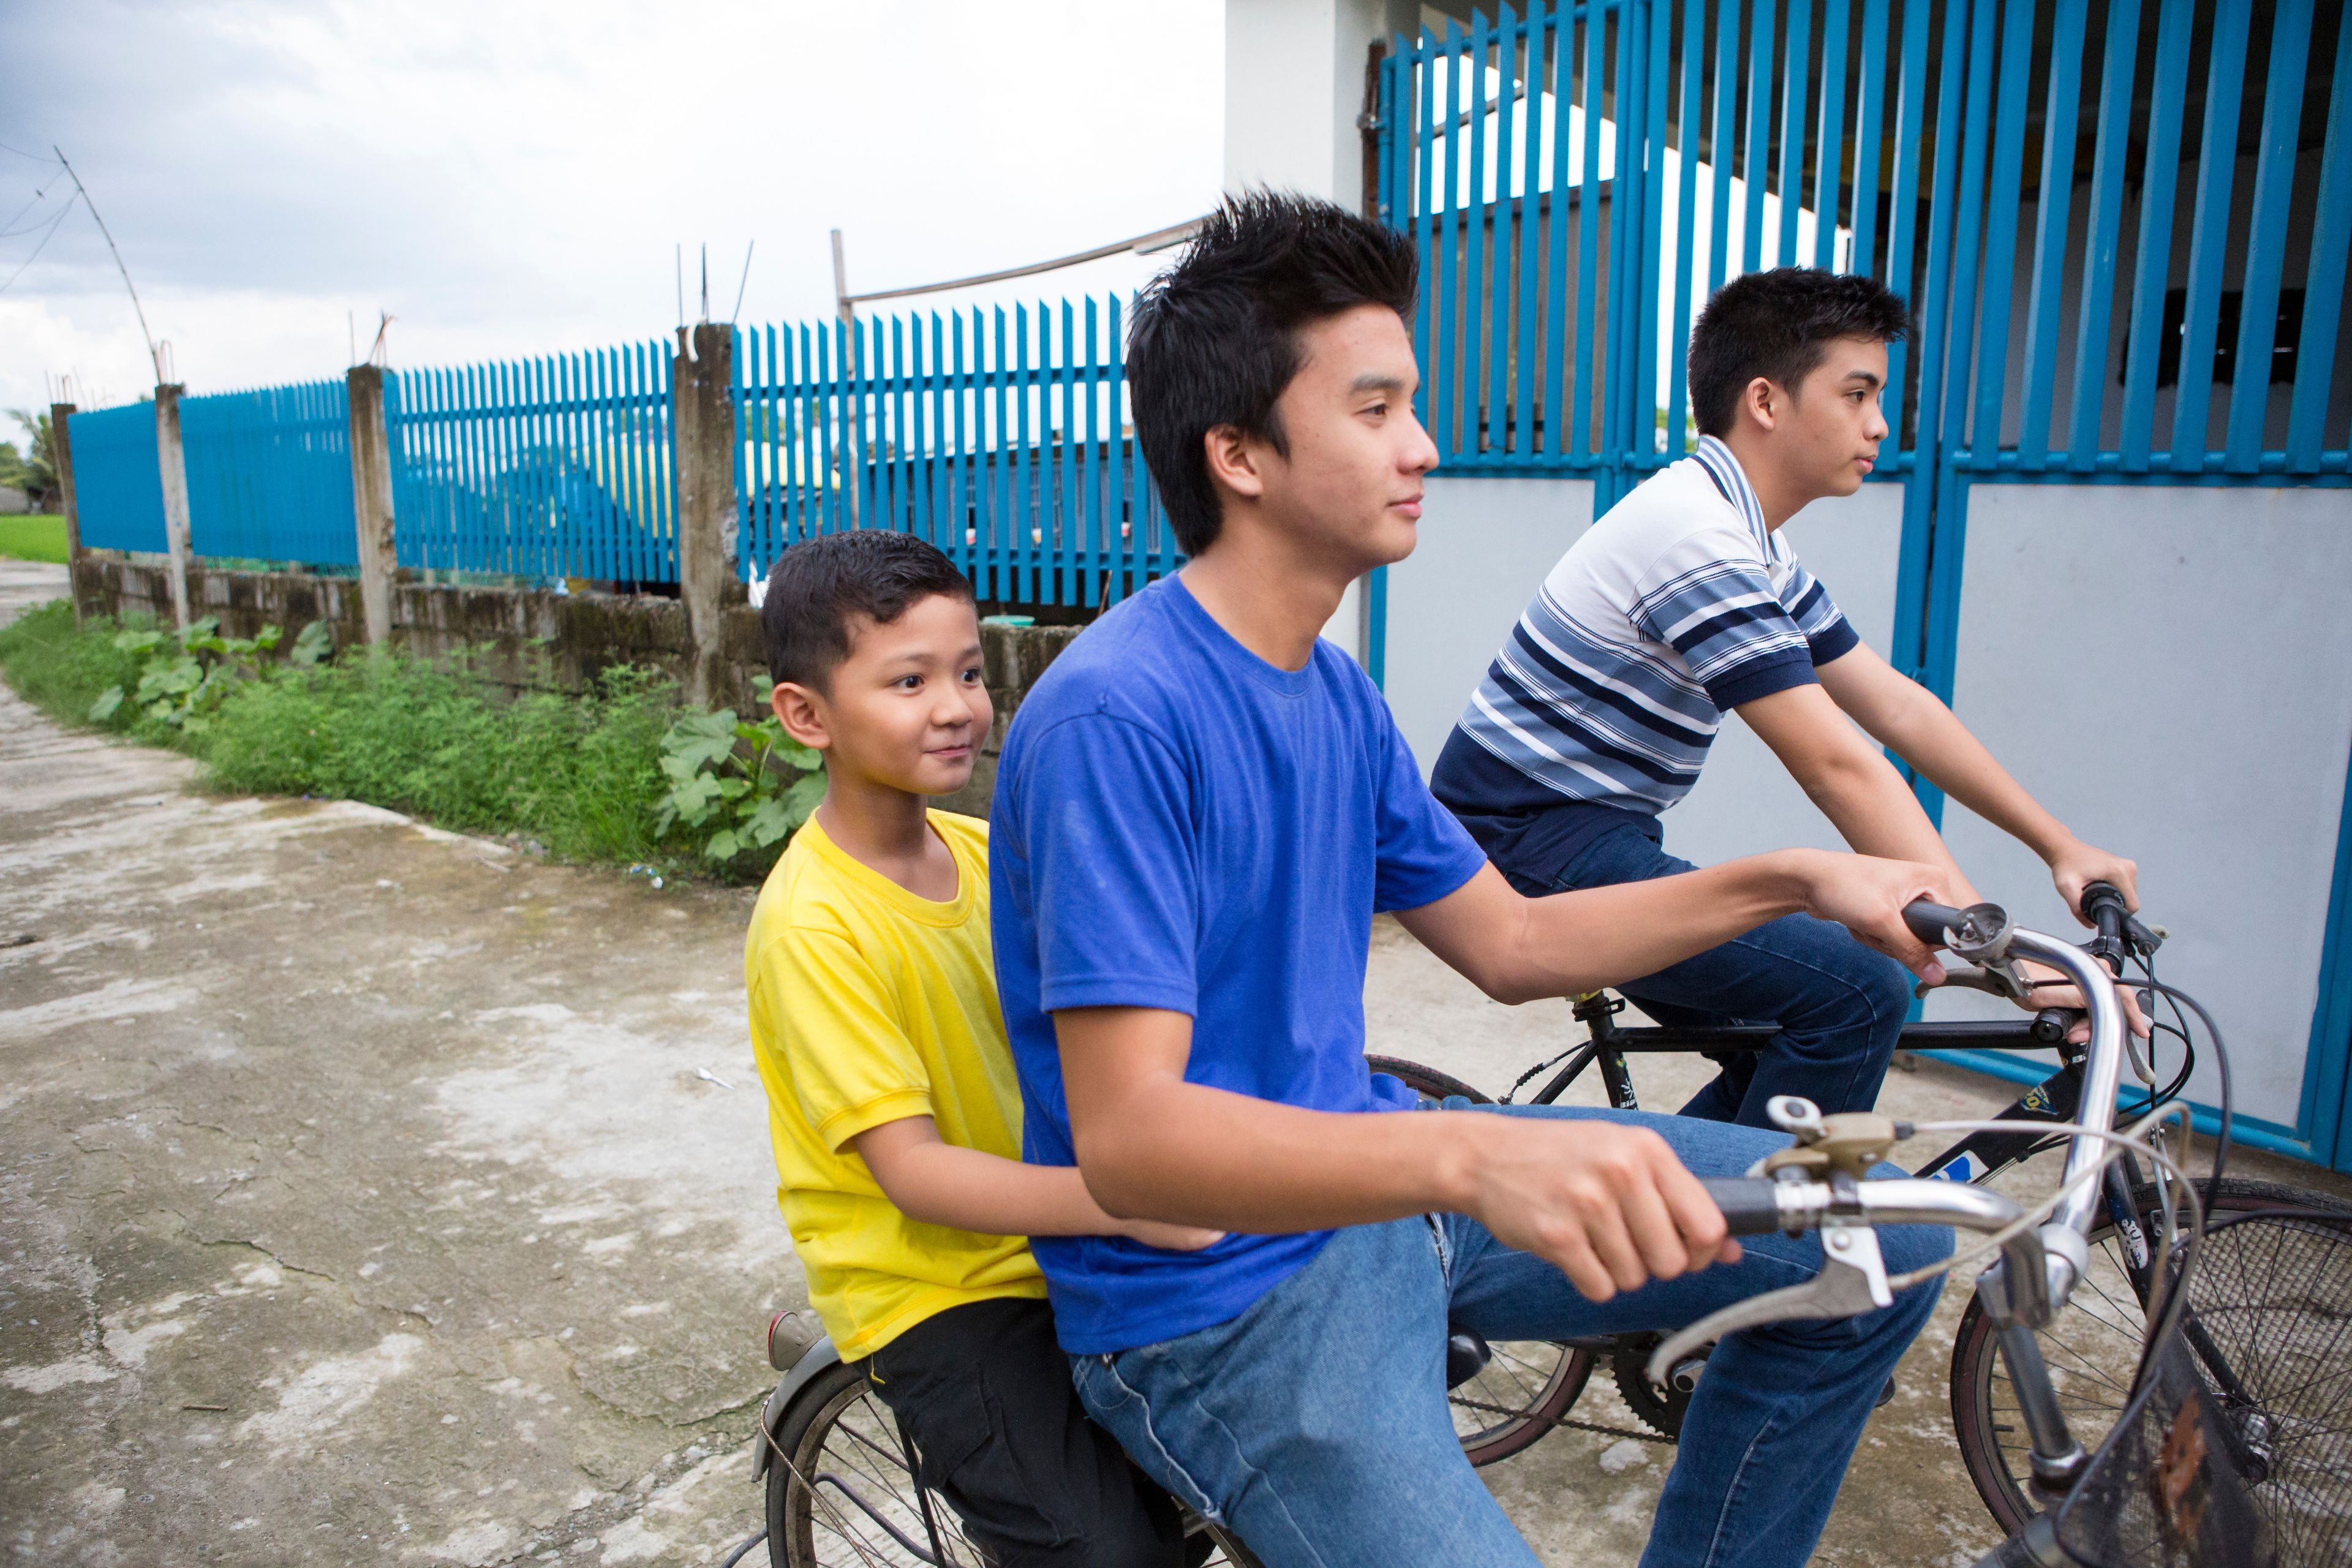 A young man rides a bike with a boy sitting behind him and another young man riding next to them.  